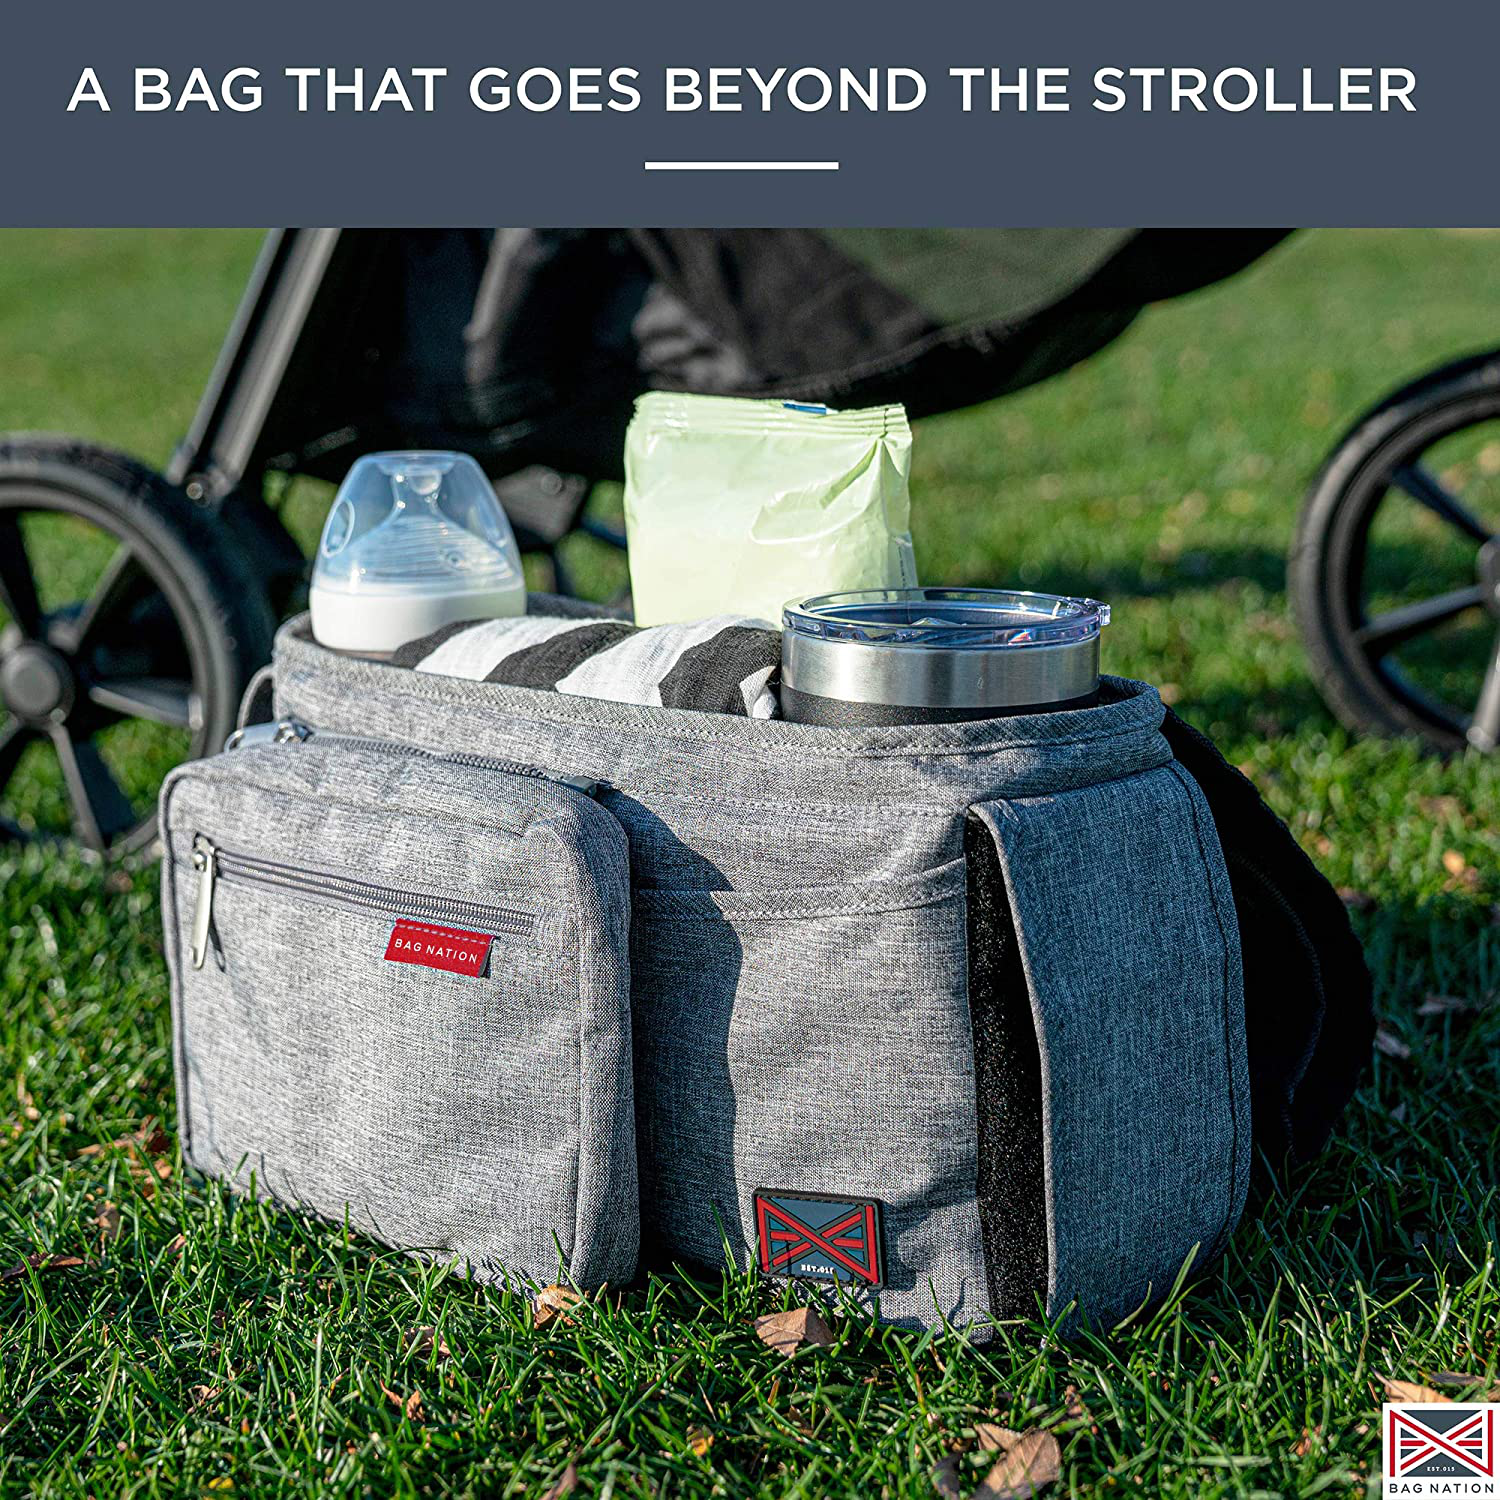 Bag Nation Universal Stroller Organizer Caddy Featuring Cup Holders, Large Main Pocket Compatible with Uppababy, Baby Jogger, Britax, Bugaboo, BOB, Umbrella and Pet Stroller - Grey Animals & Pet Supplies > Pet Supplies > Dog Supplies > Dog Treadmills Bag Nation   